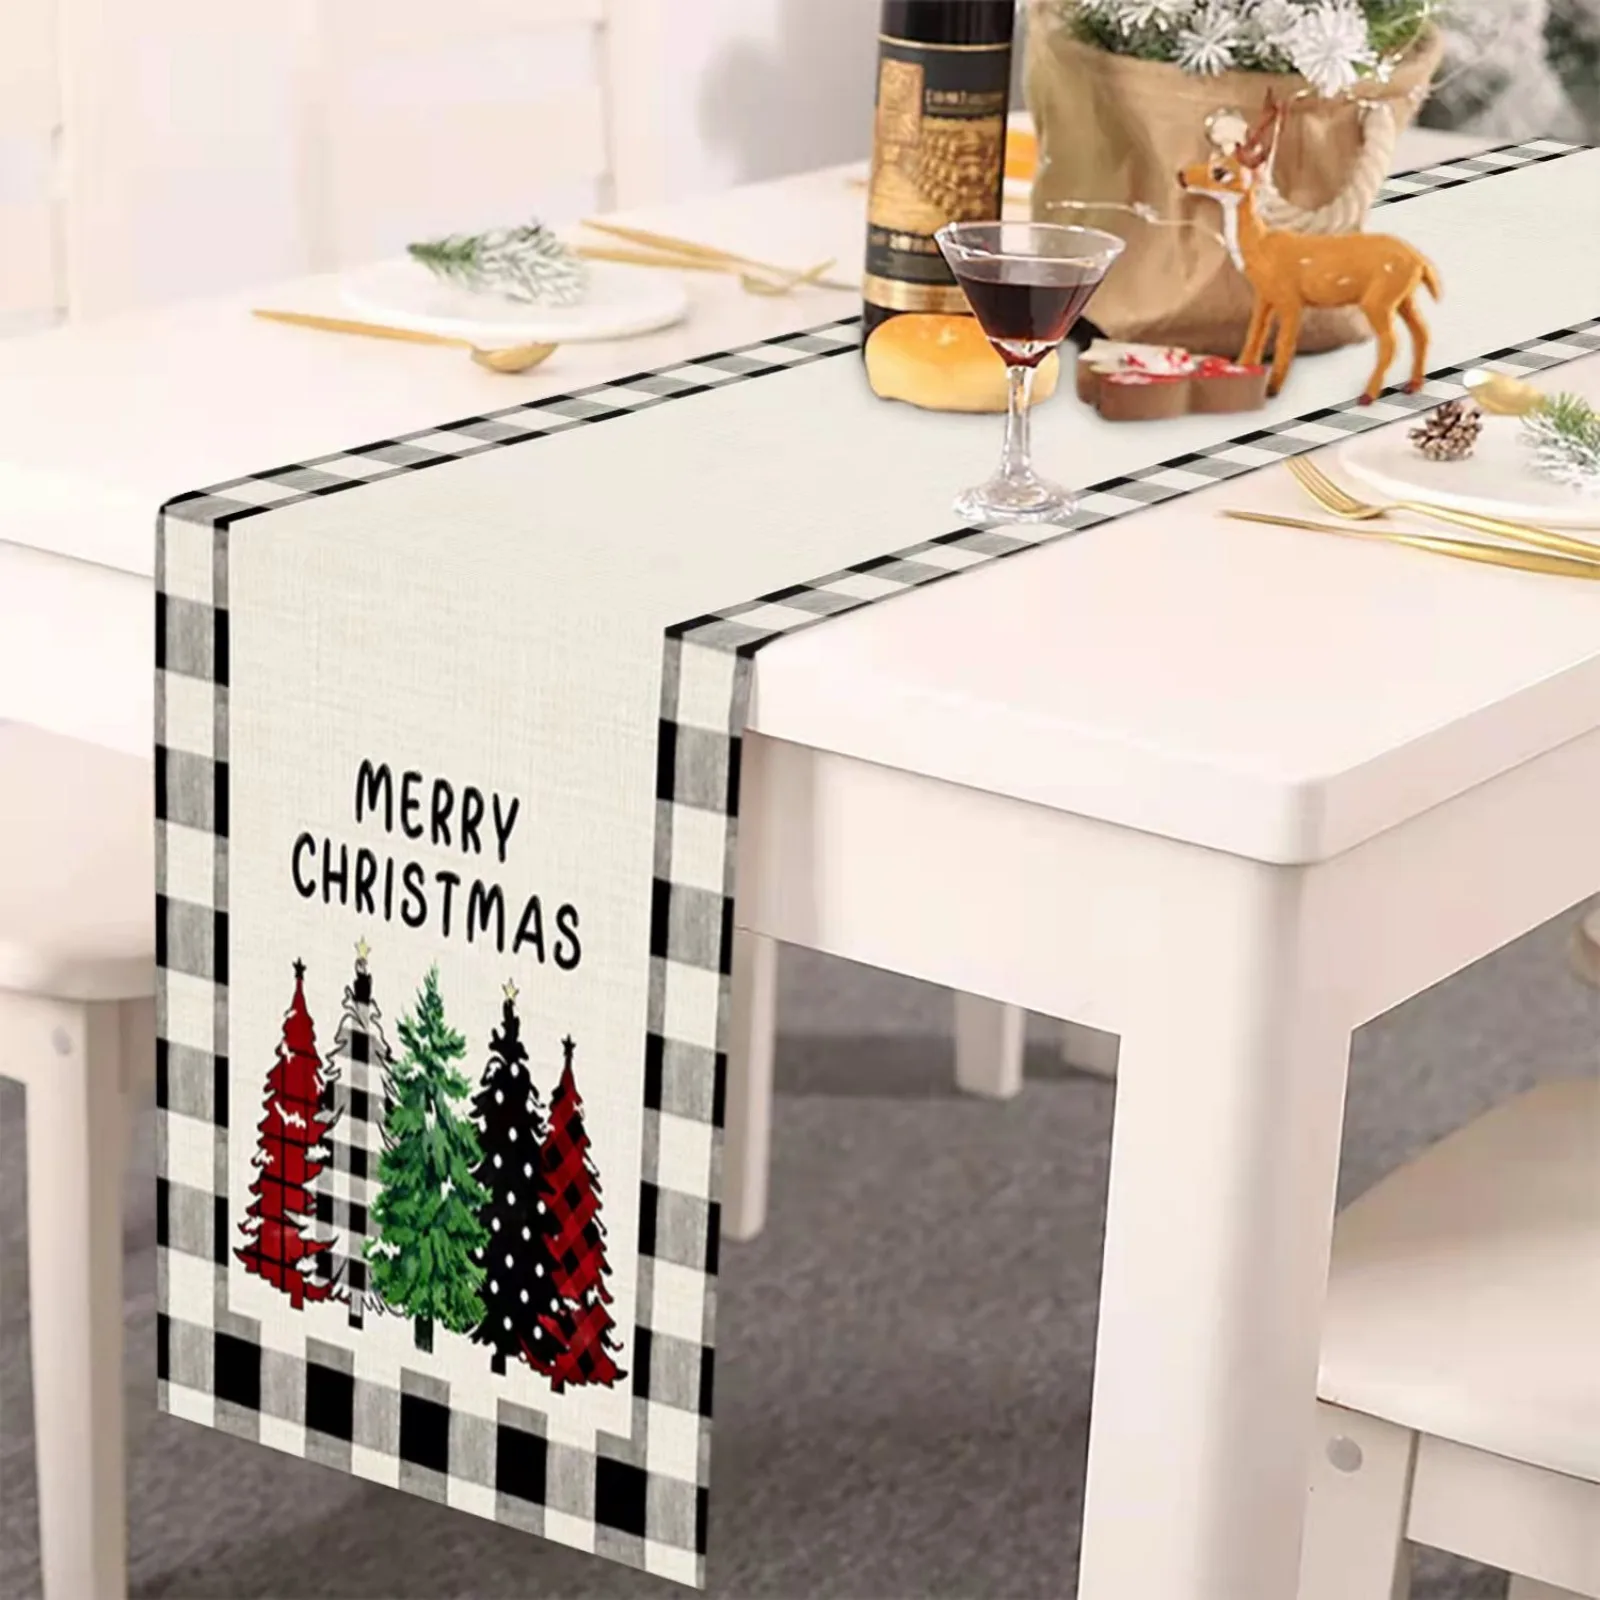 

Lattice Christmas Tree Merry Christmas Tablecloth Seasonal Kitchen Table Decoration Indoor Outdoor Family Party Decoration